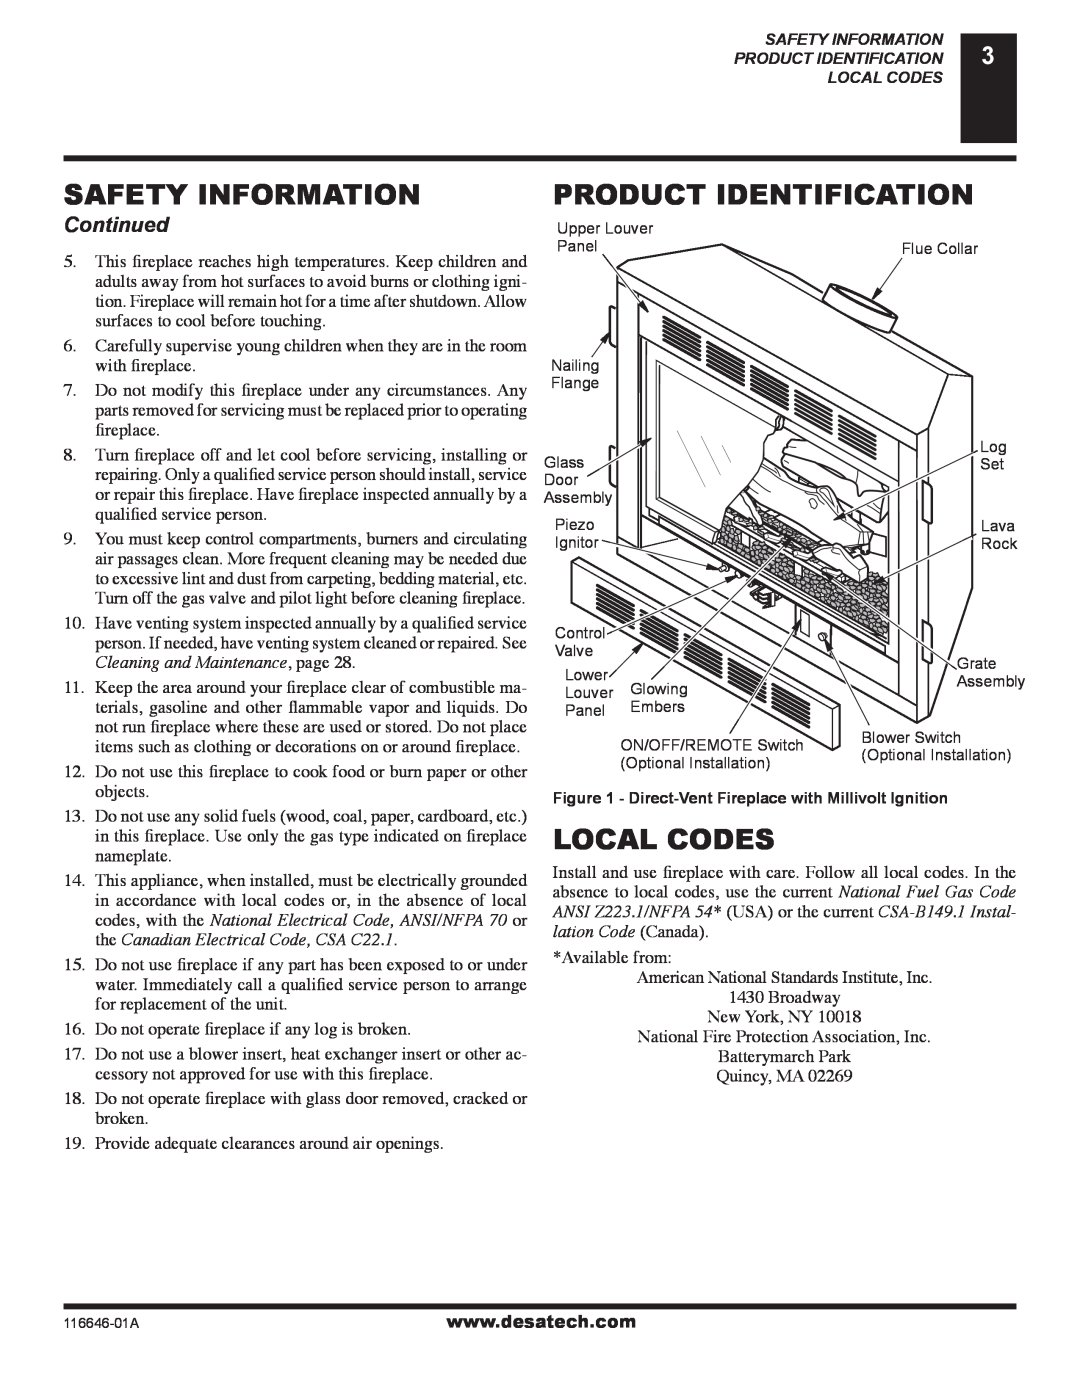 Desa (V)T32N-A Series Product Identification, Local Codes, Continued, Safety Information, Cleaning and Maintenance, page 